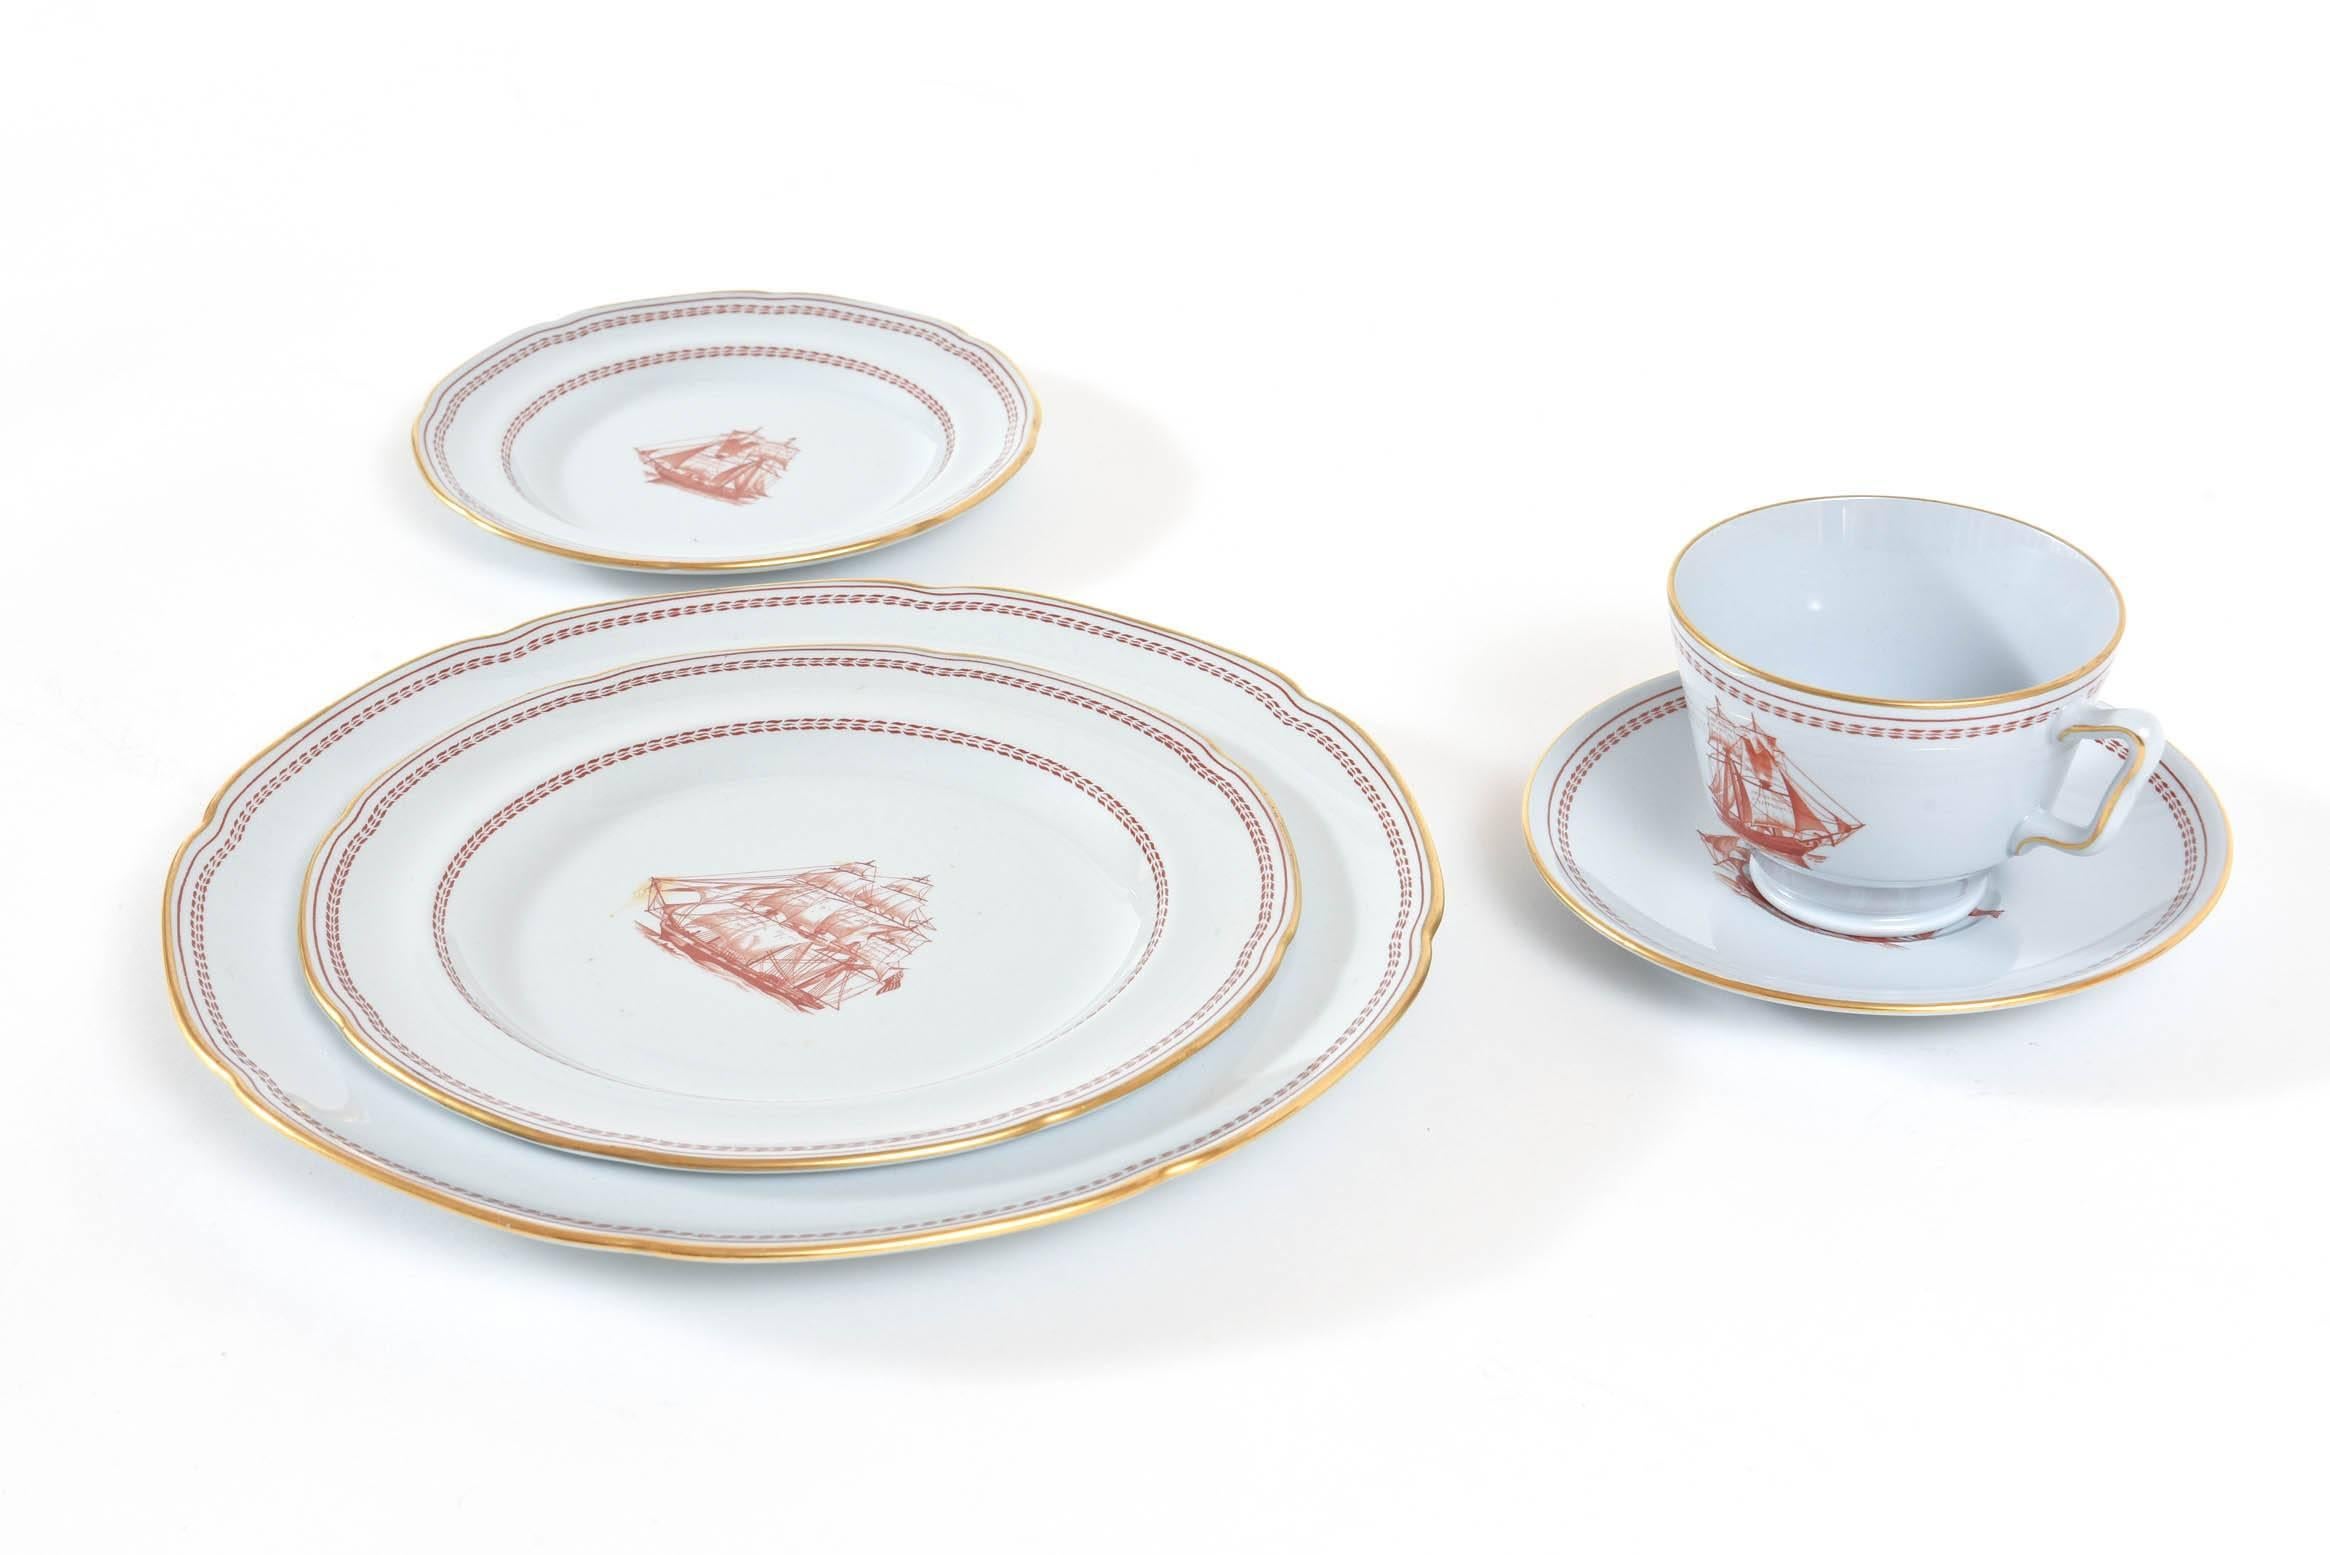 One of Spode's Classic patterns done in the traditional 